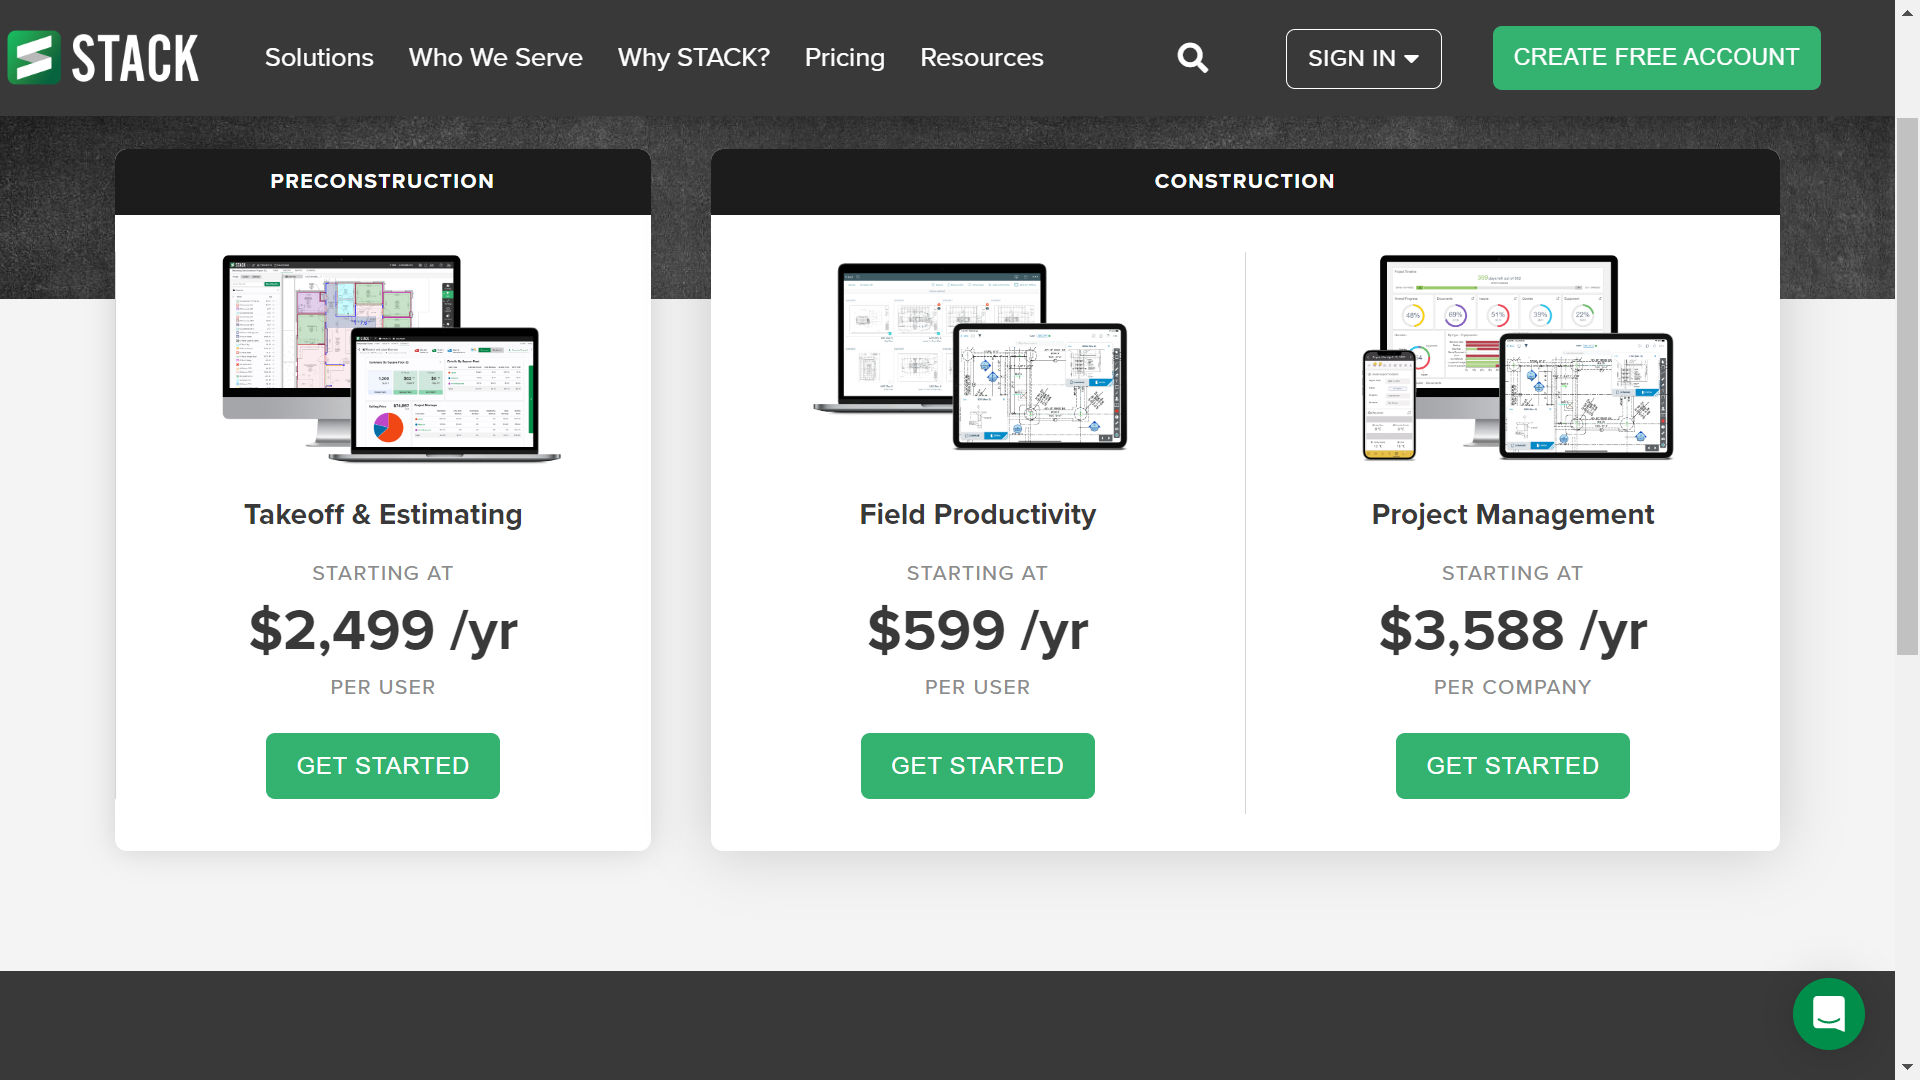 Stack's software pricing page for 2023